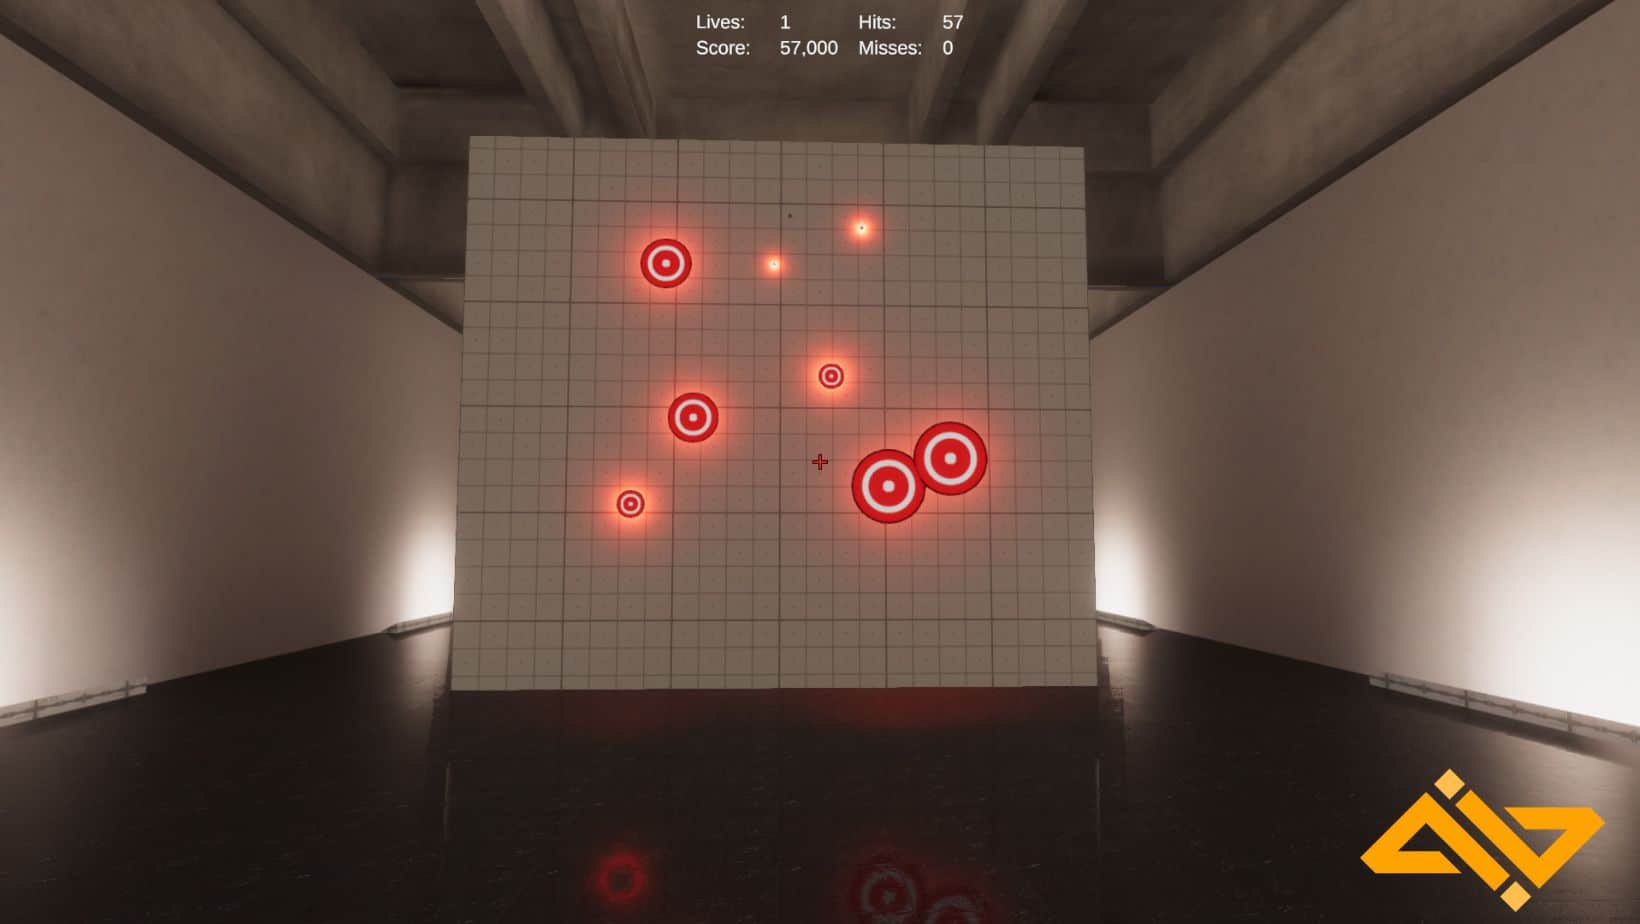 Aimtastic gives you a lot of different target practice rooms with player movements.